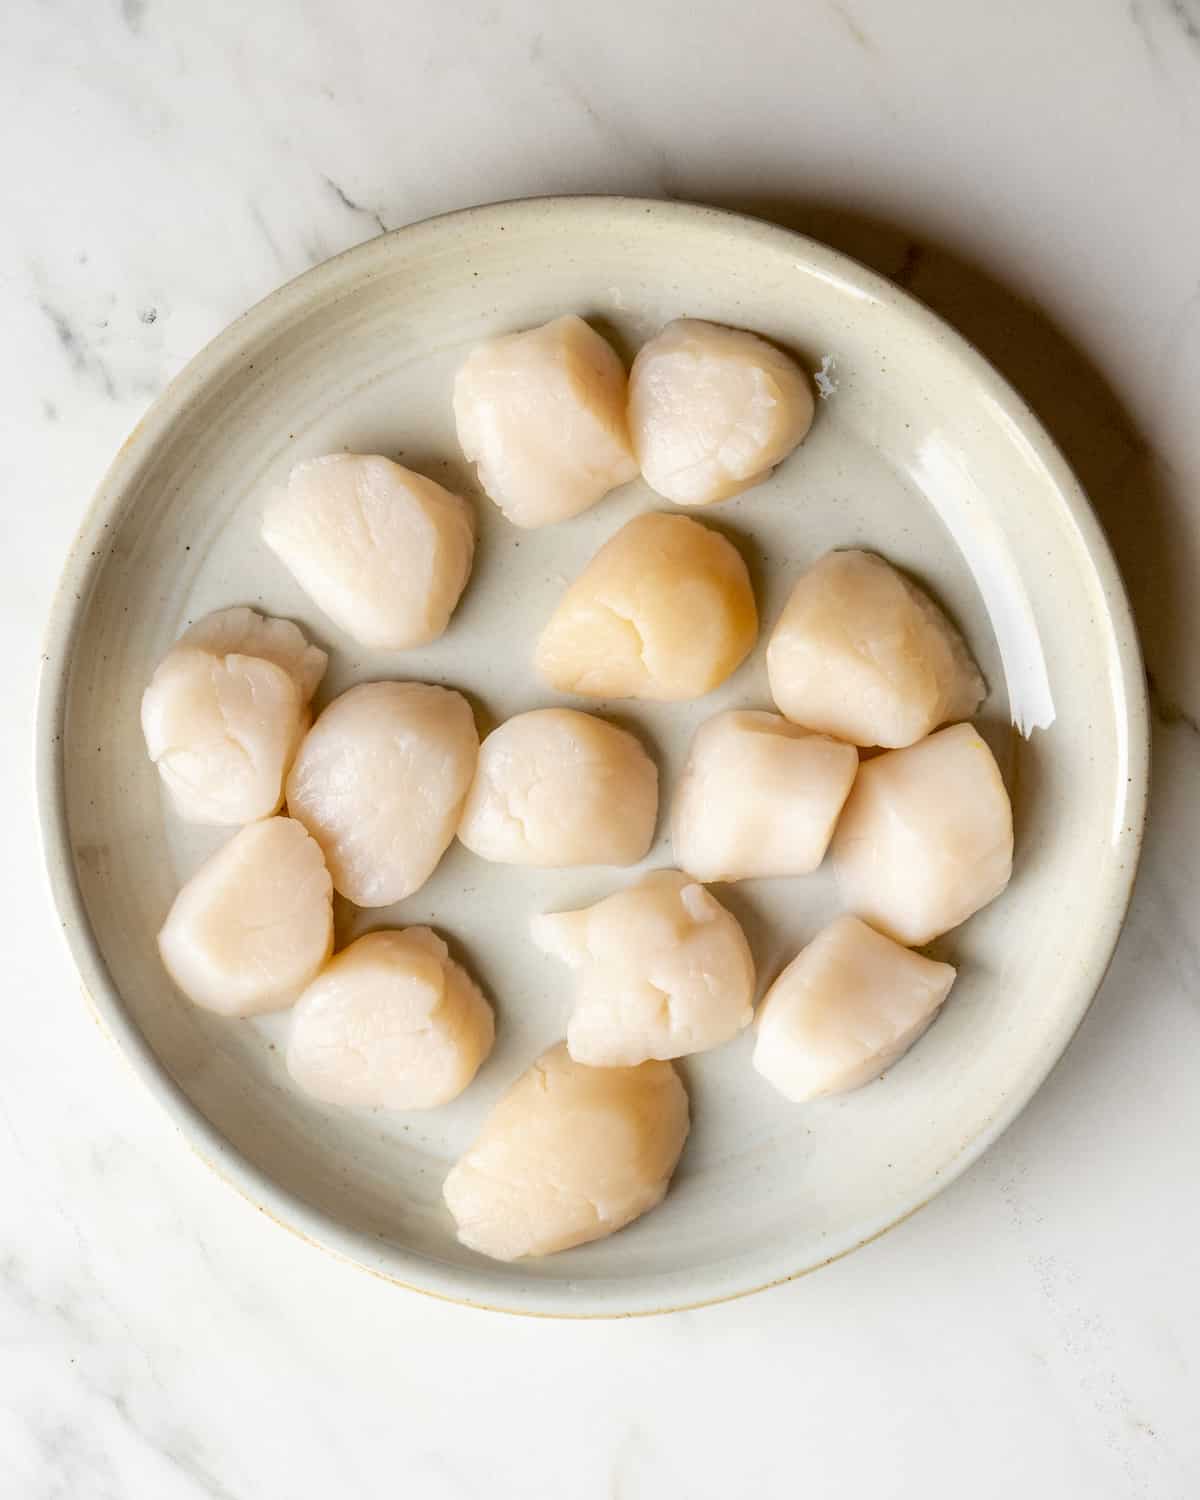 A plate of 14 scallops with the muscle removed and that have been patted dry with a paper towel.